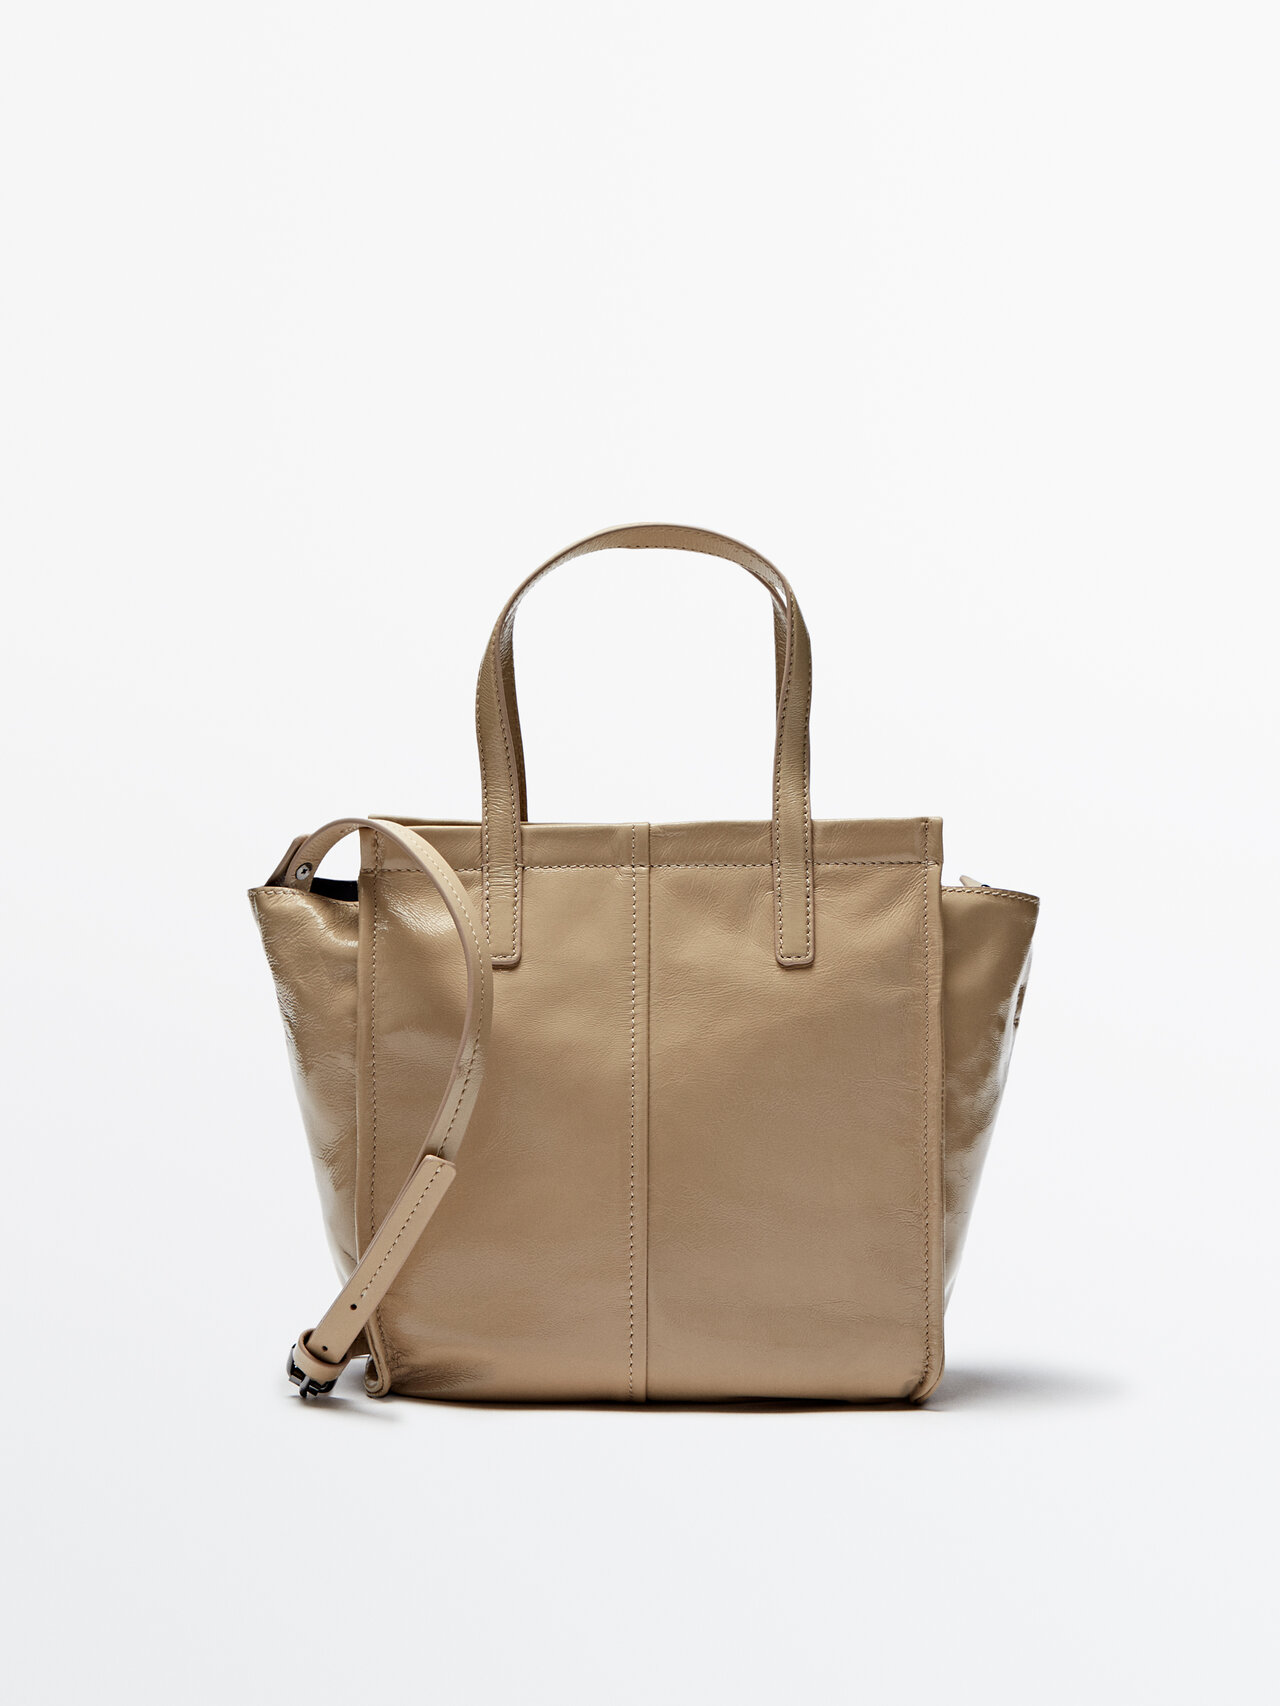 Massimo Dutti Mini Leather Tote Bag With A Crackled Finish In Brown